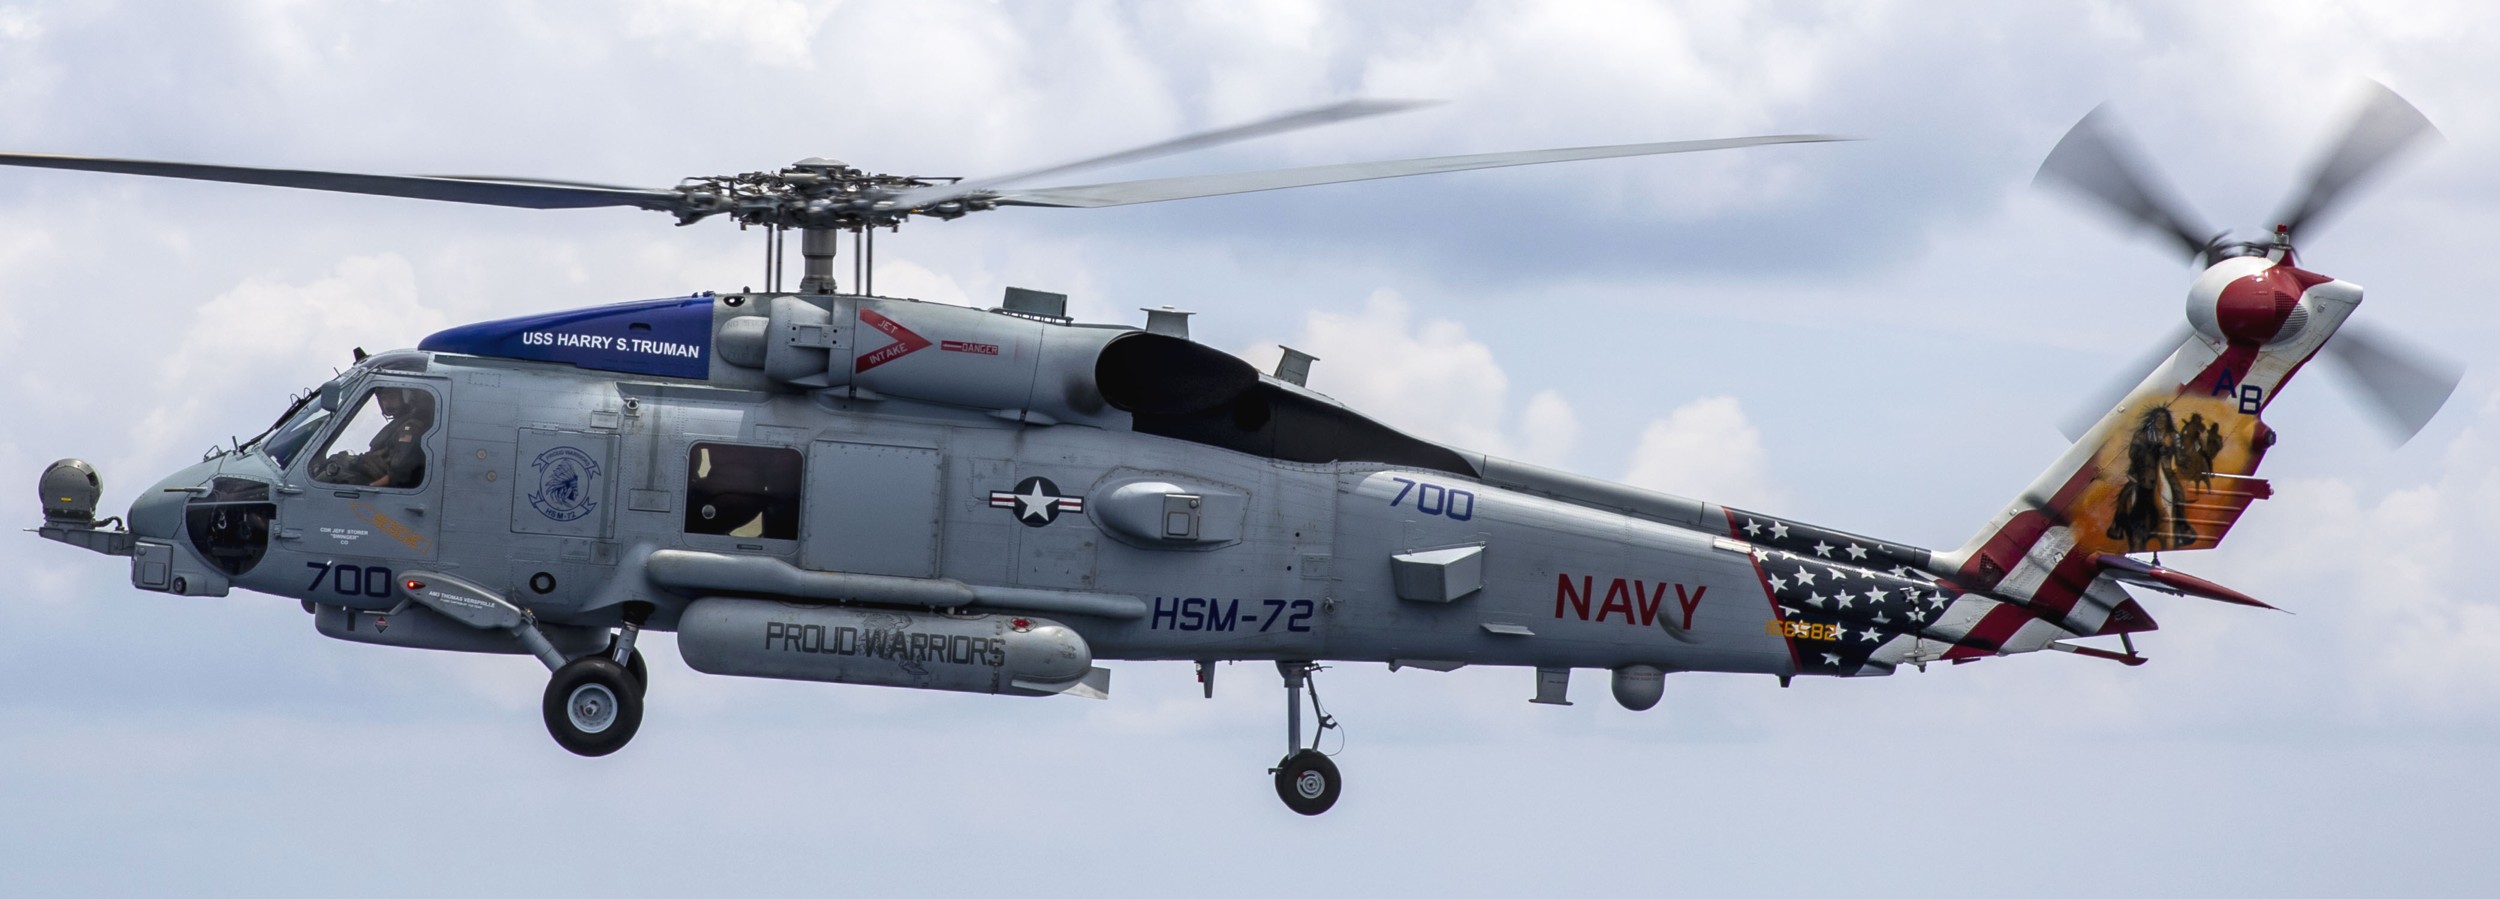 hsm-72 proud warriors helicopter maritime strike squadron us navy mh-60r seahawk special livery 2023 80